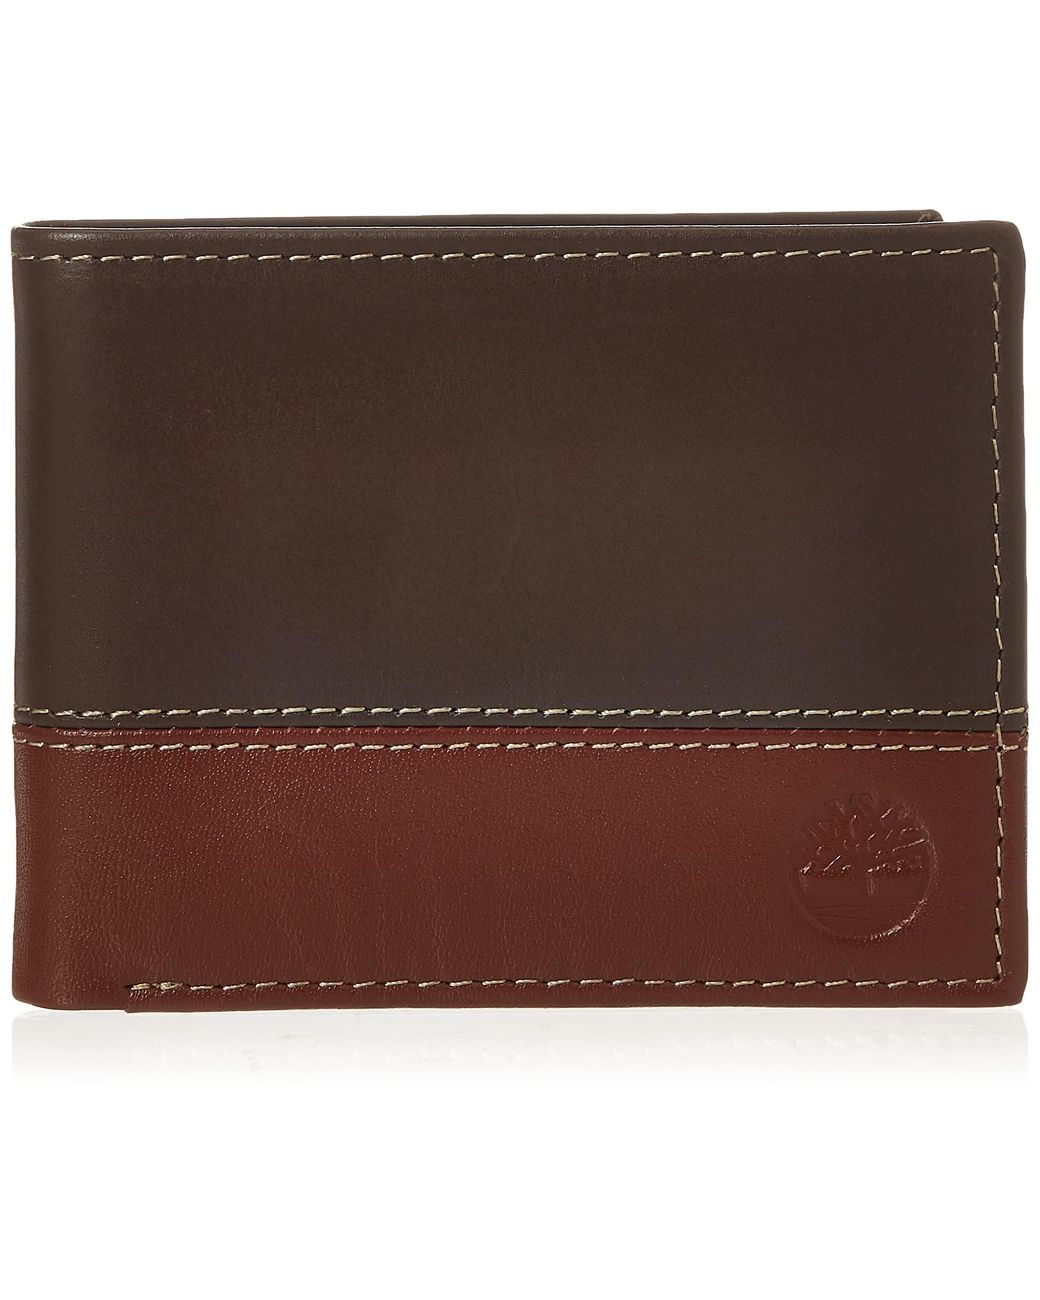 Timberland Hunter Leather Passcase Wallet Trifold Wallet Hybrid in  Brown/Cognac (Brown) for Men - Save 5% - Lyst